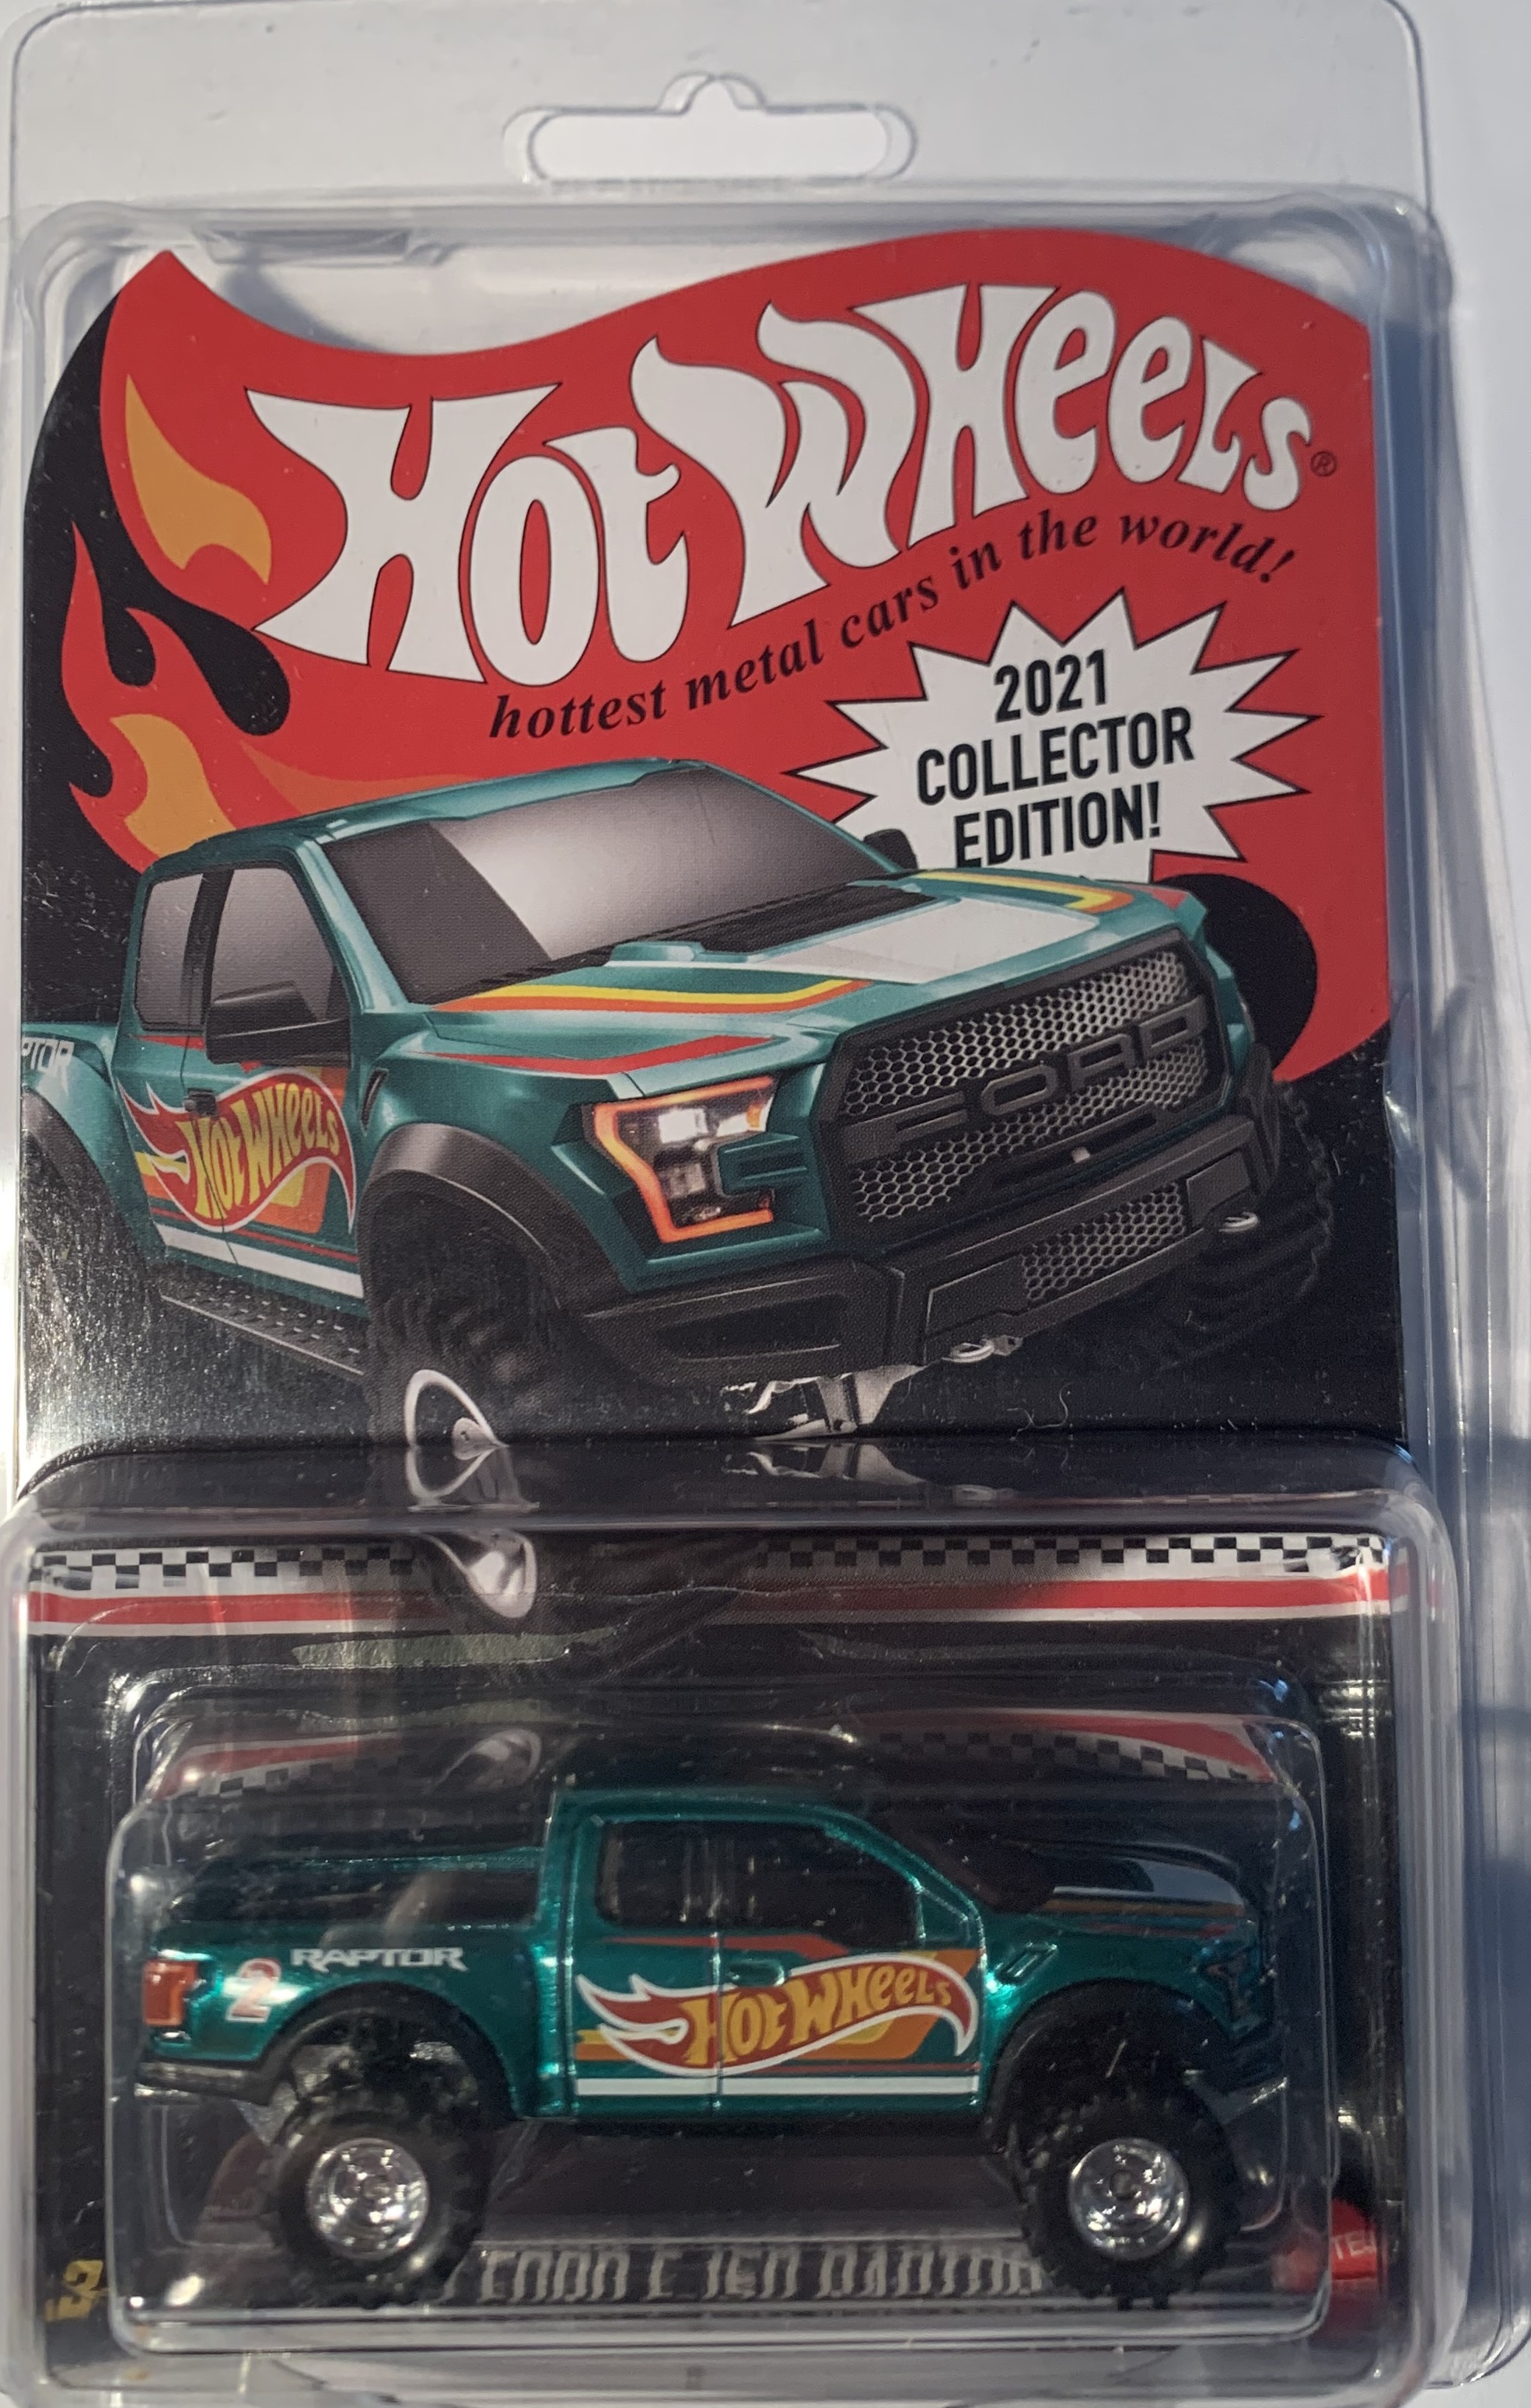 About Hot Wheels Collectors